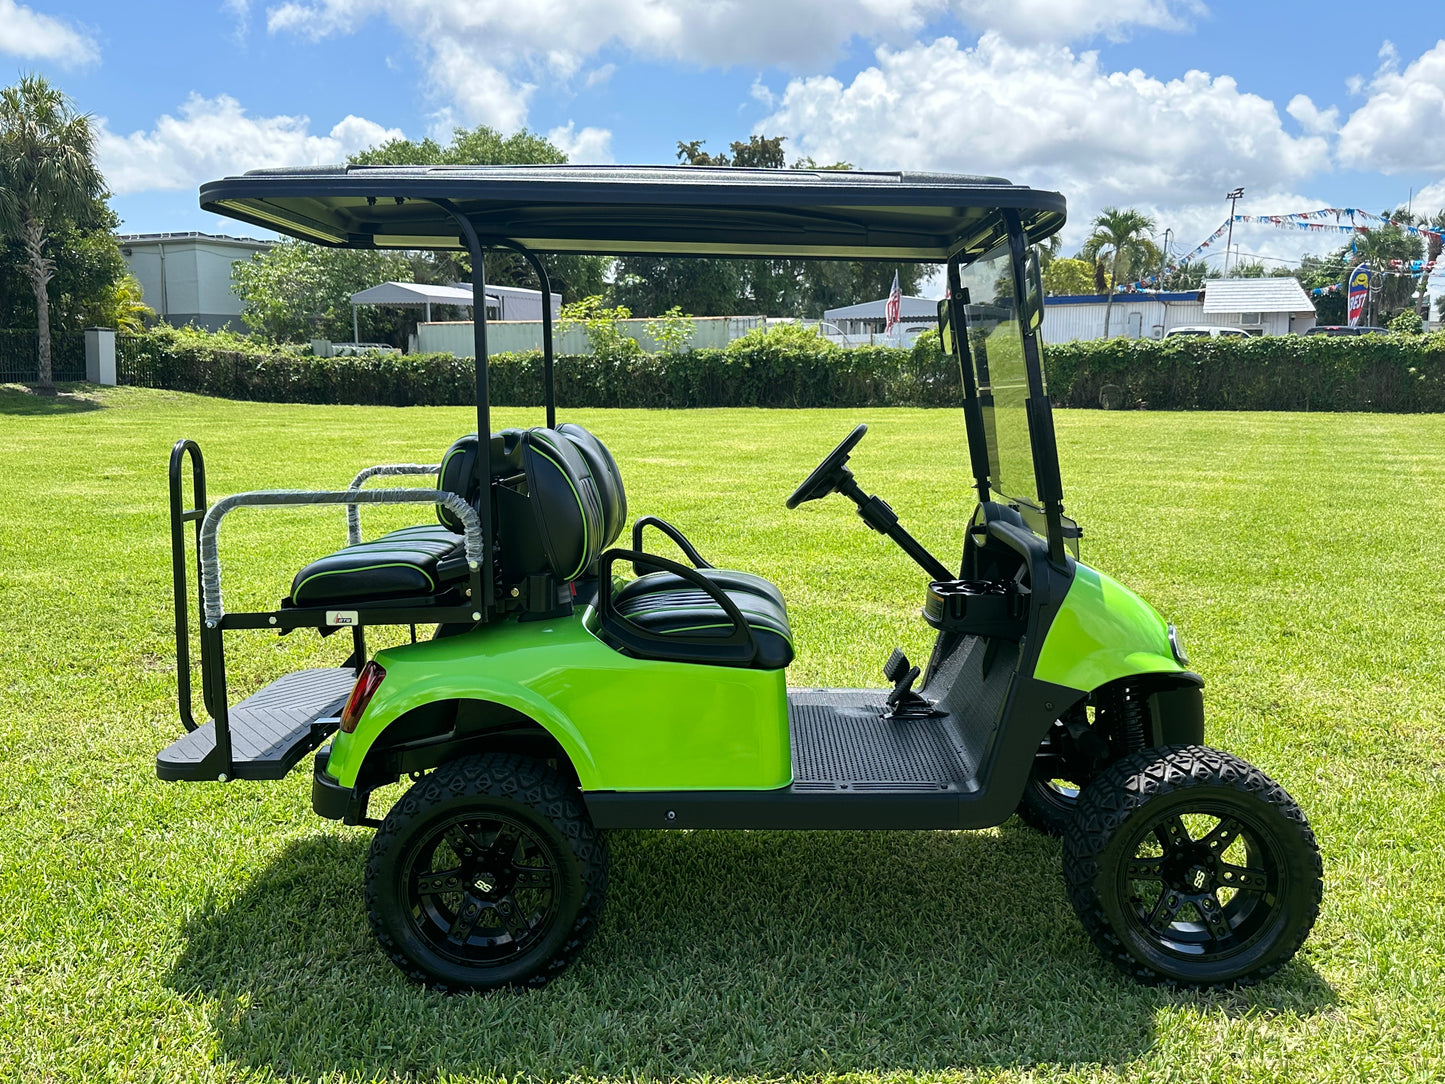 Cutting Edge Golf Carts - 2021 Lamborghini Green E-Z-GO Elite Lithium 48V RXV in Fort Lauderdale, FL. Jakes 6" Lift, custom SS rims, 84" top, deluxe lights, tinted windshield, seatbelts.




